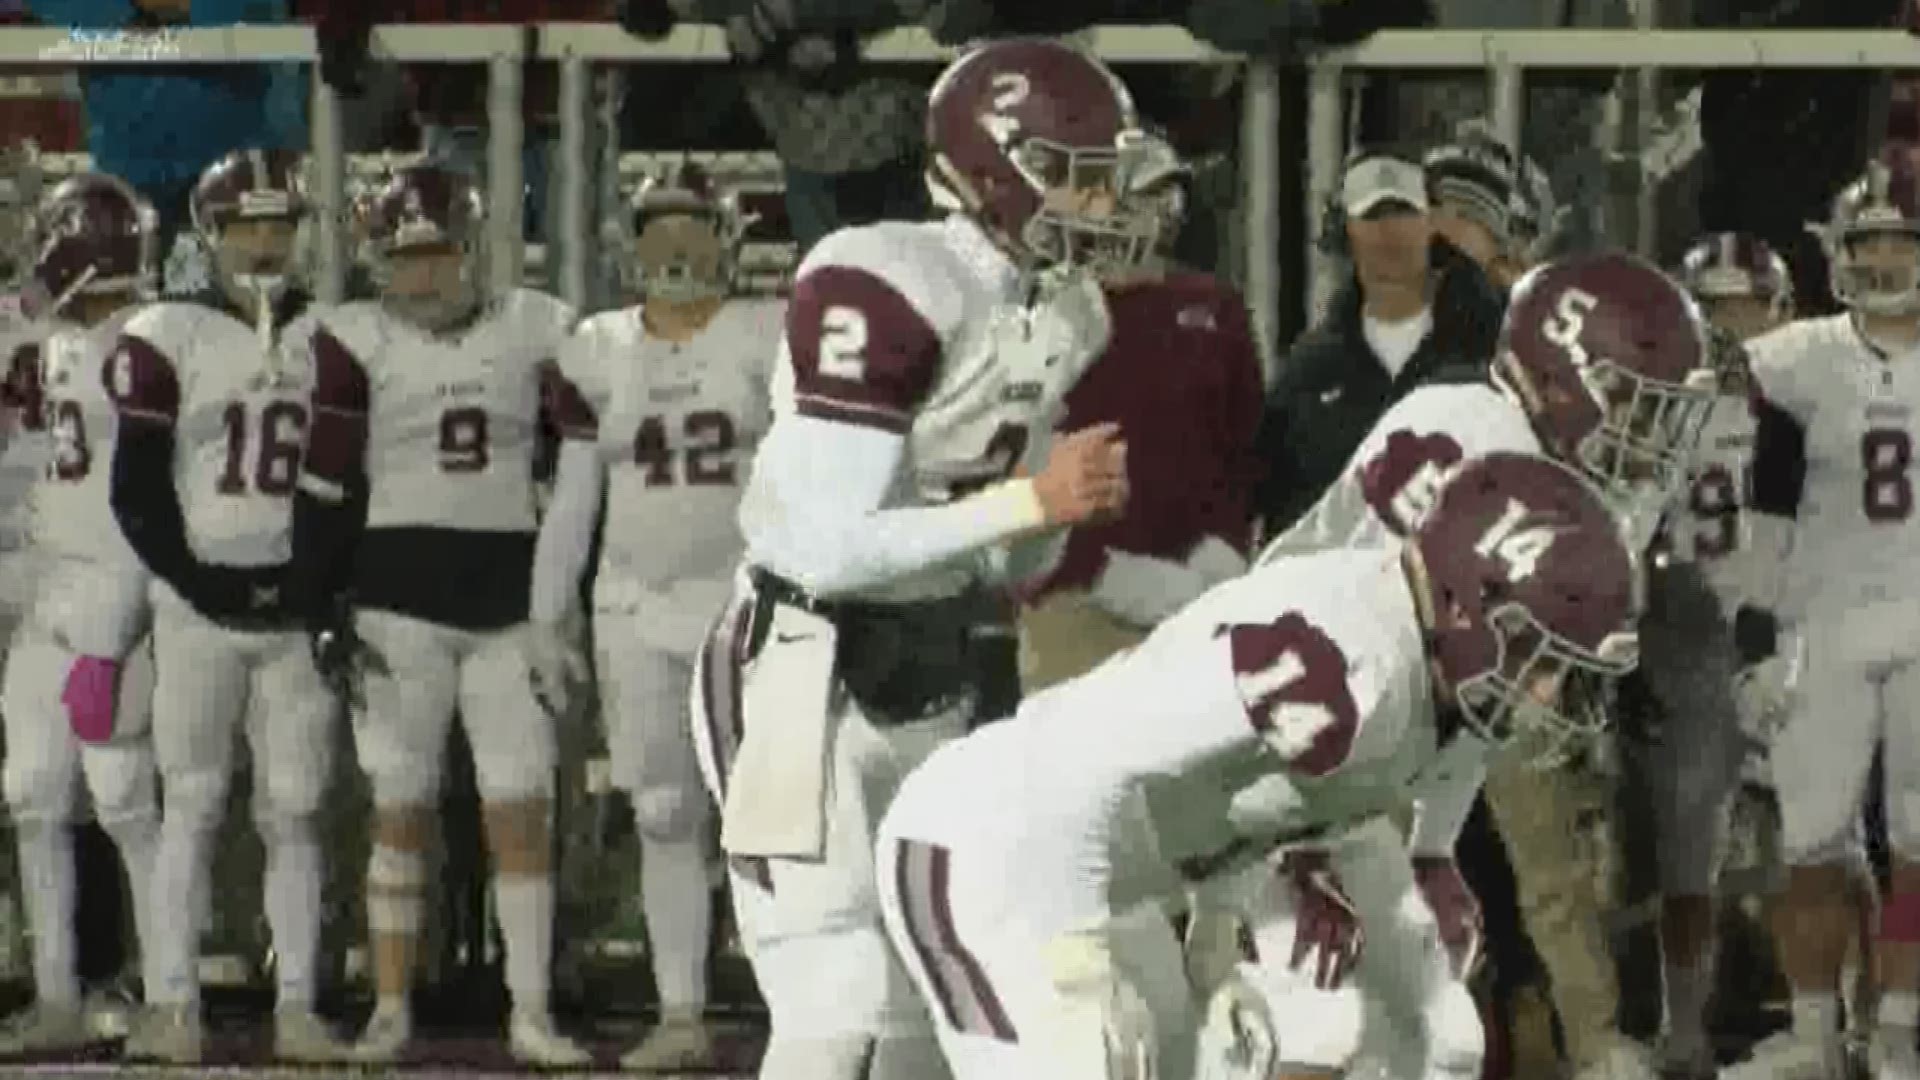 Dobyns-Bennett knocks Bearden out of the playoffs with a second round win.